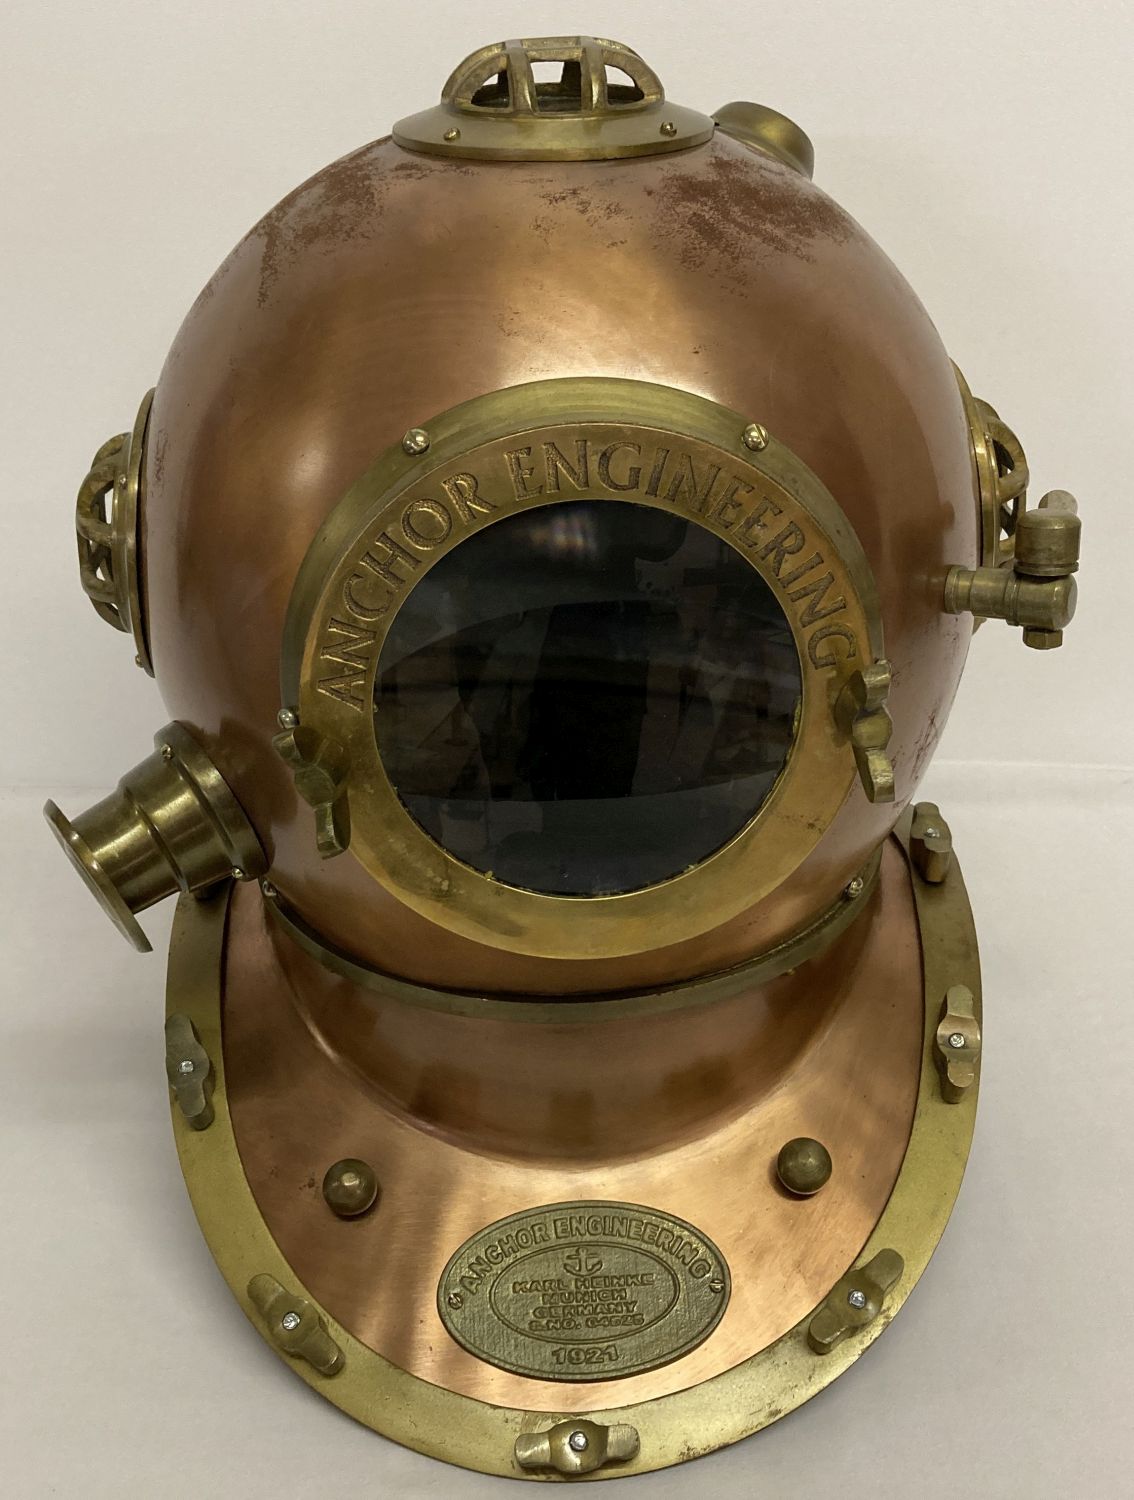 A copper and brass Anchor Engineering divers helmet with glass panels.